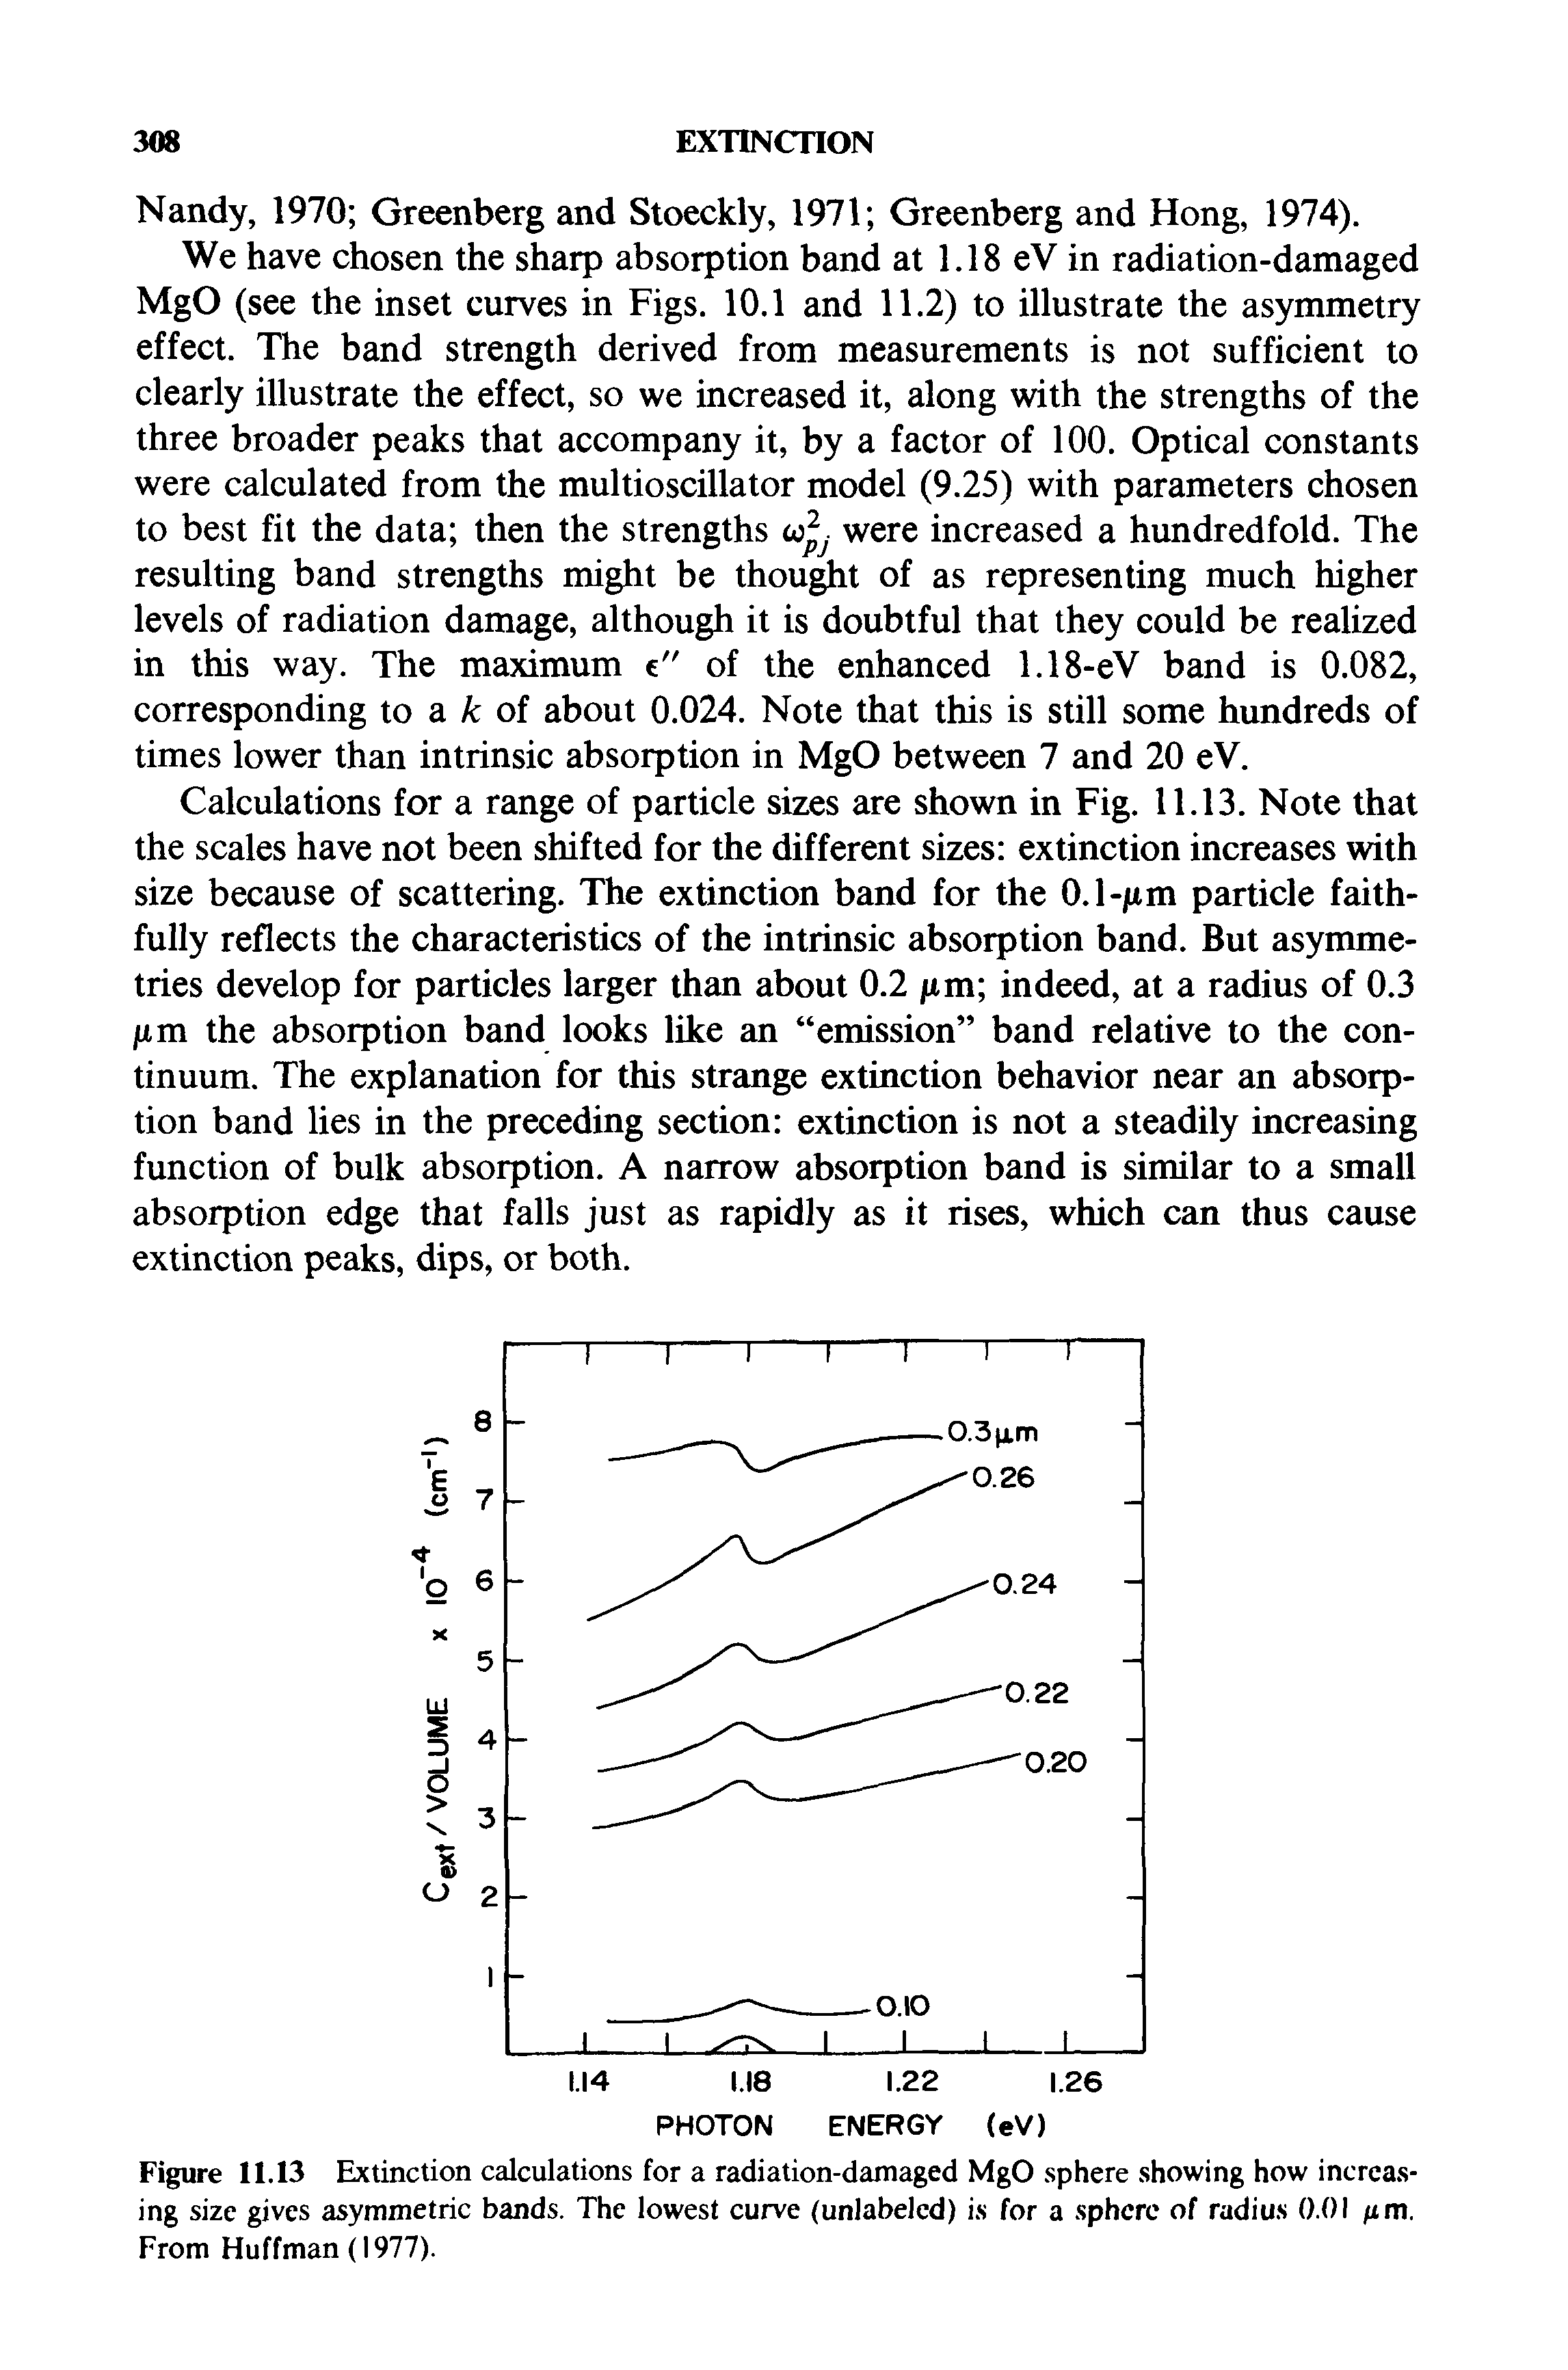 Figure 11.13 Extinction calculations for a radiation-damaged MgO sphere showing how increasing size gives asymmetric bands. The lowest curve (unlabelcd) is for a sphere of radius 0.01 fim. From Huffman (1977).